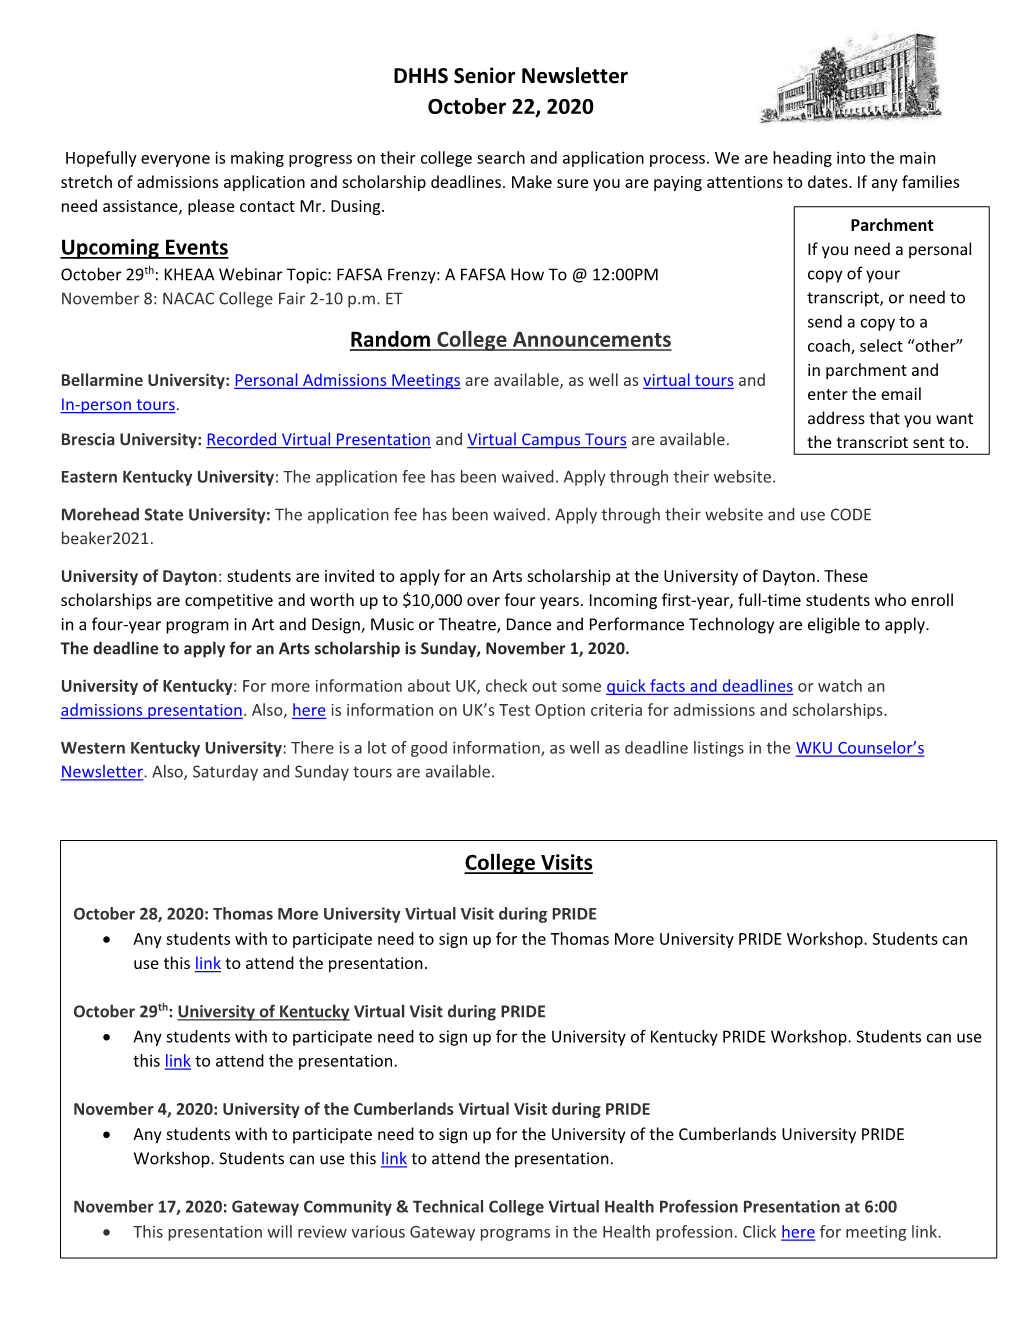 DHHS Senior Newsletter October 22, 2020 Upcoming Events Random College Announcements College Visits